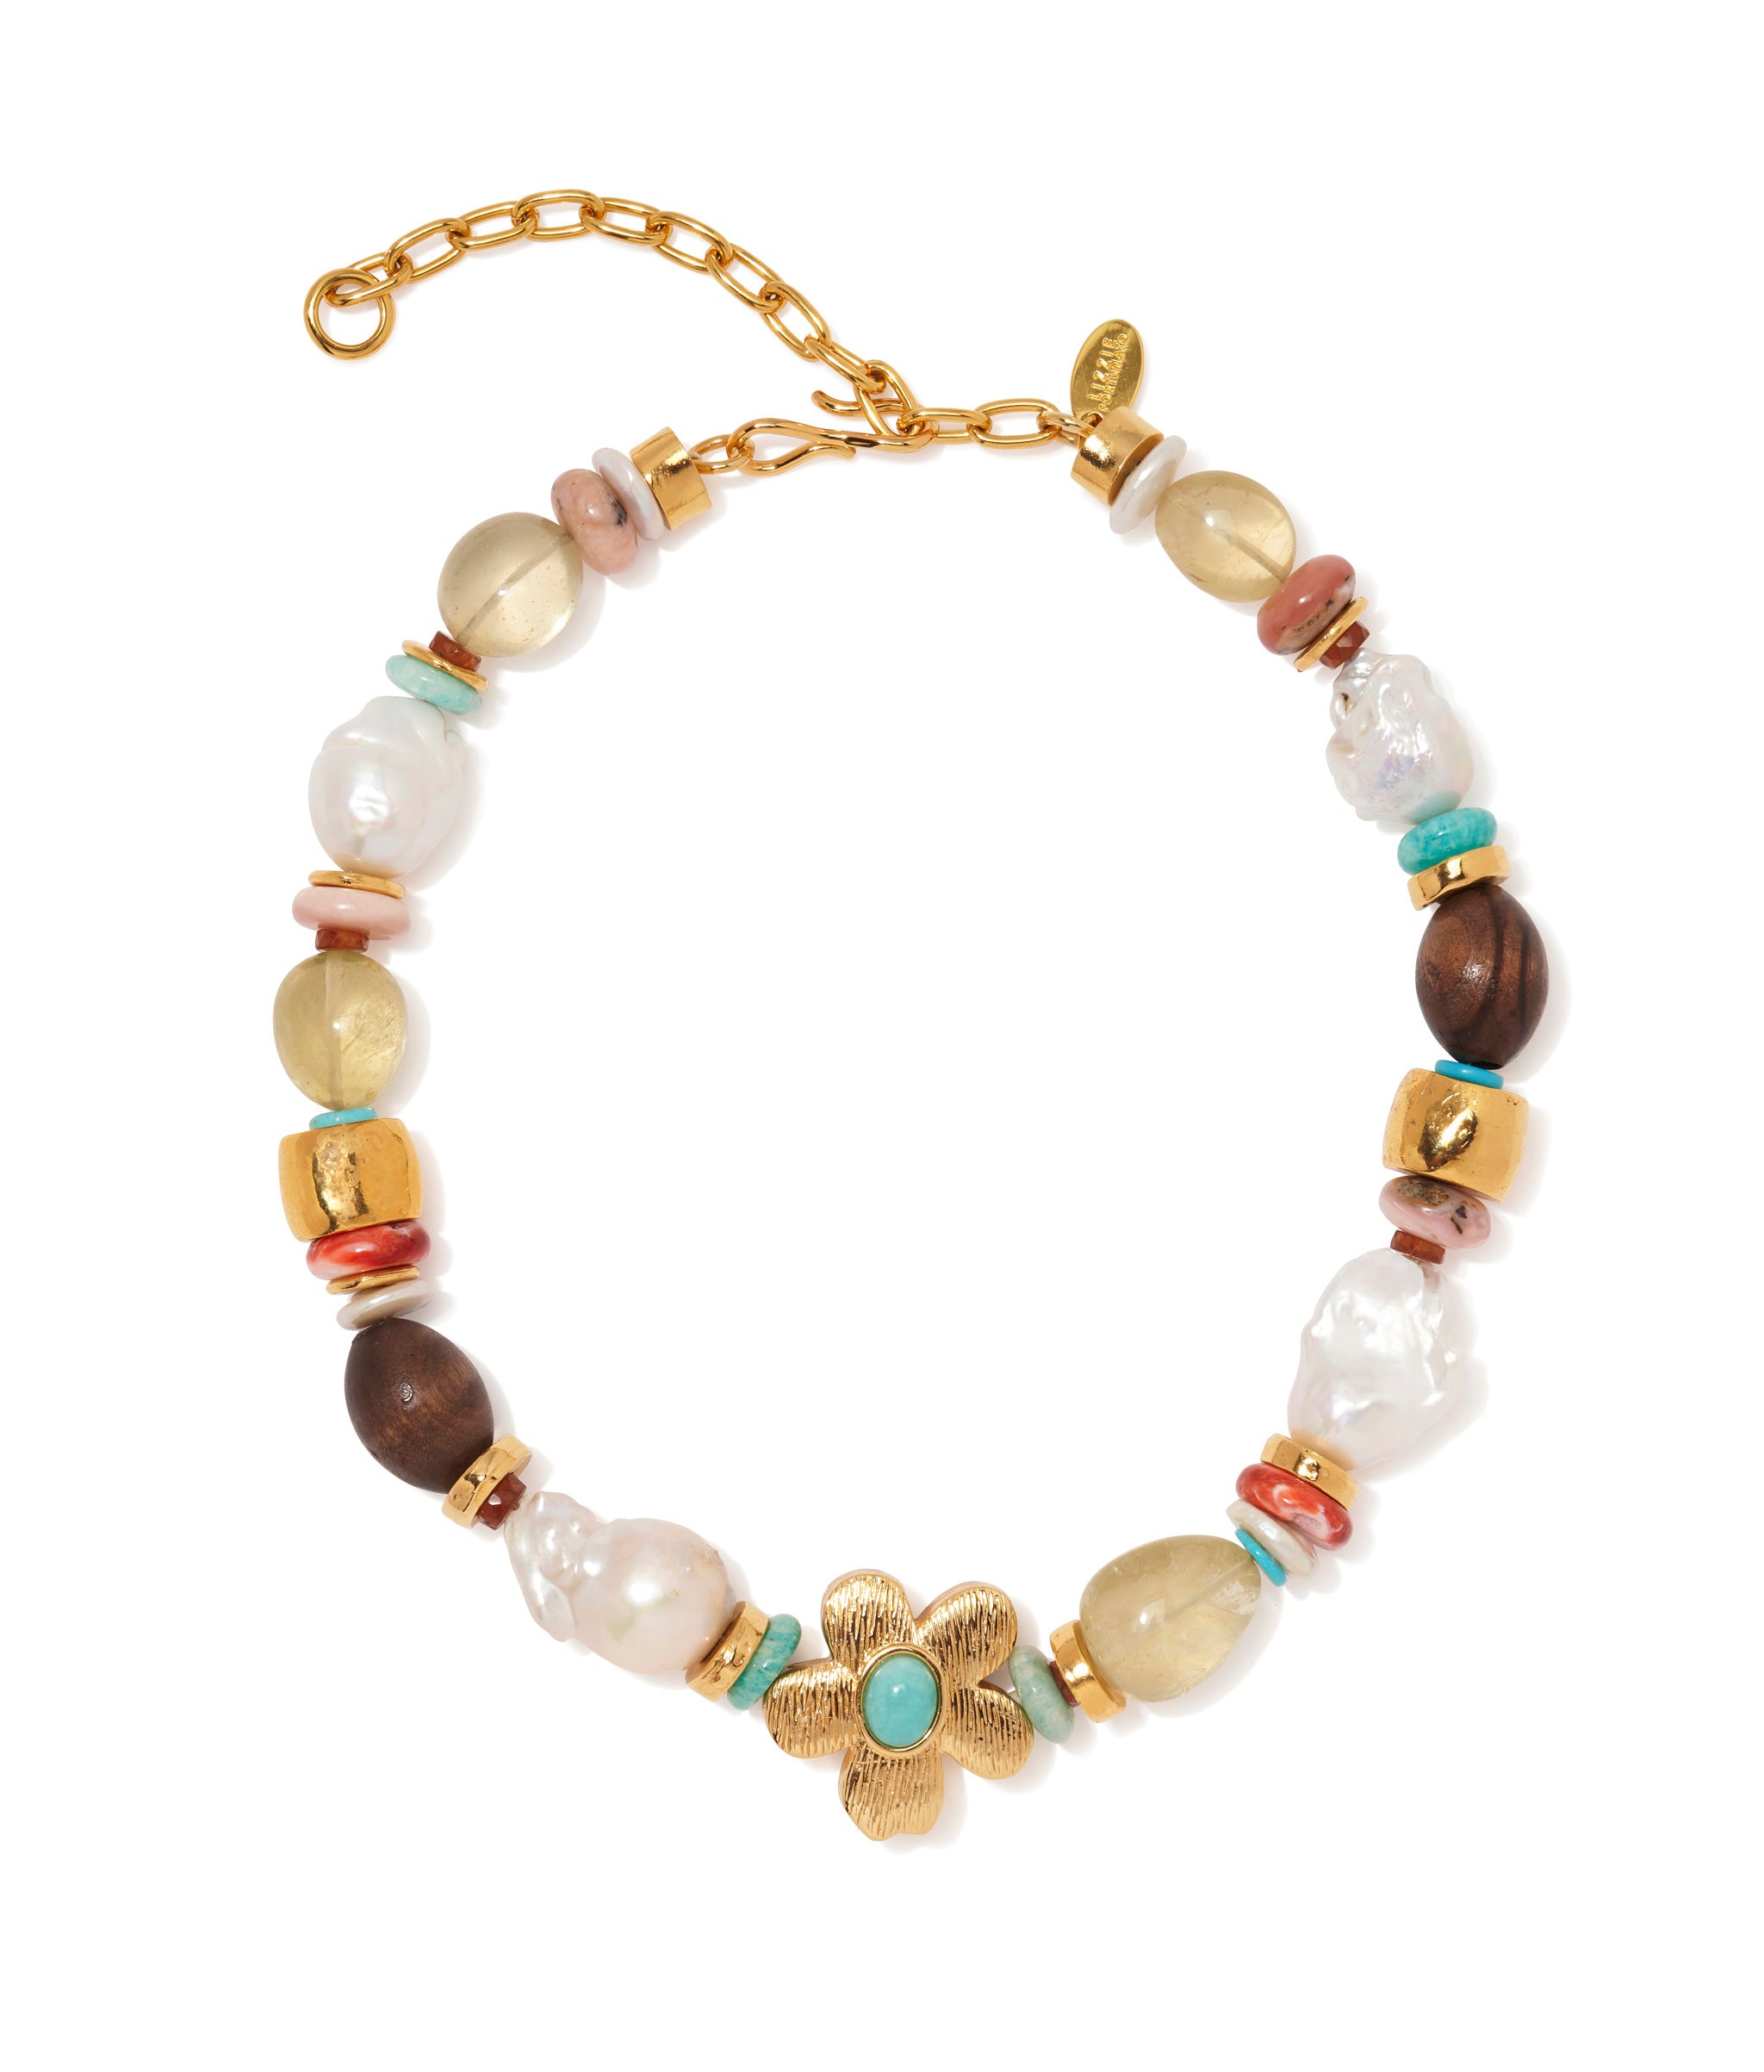 Mistflower Necklace in Apple. Multicolored necklace made of stones, wood, pearls, quartz and semiprecious amazonite.